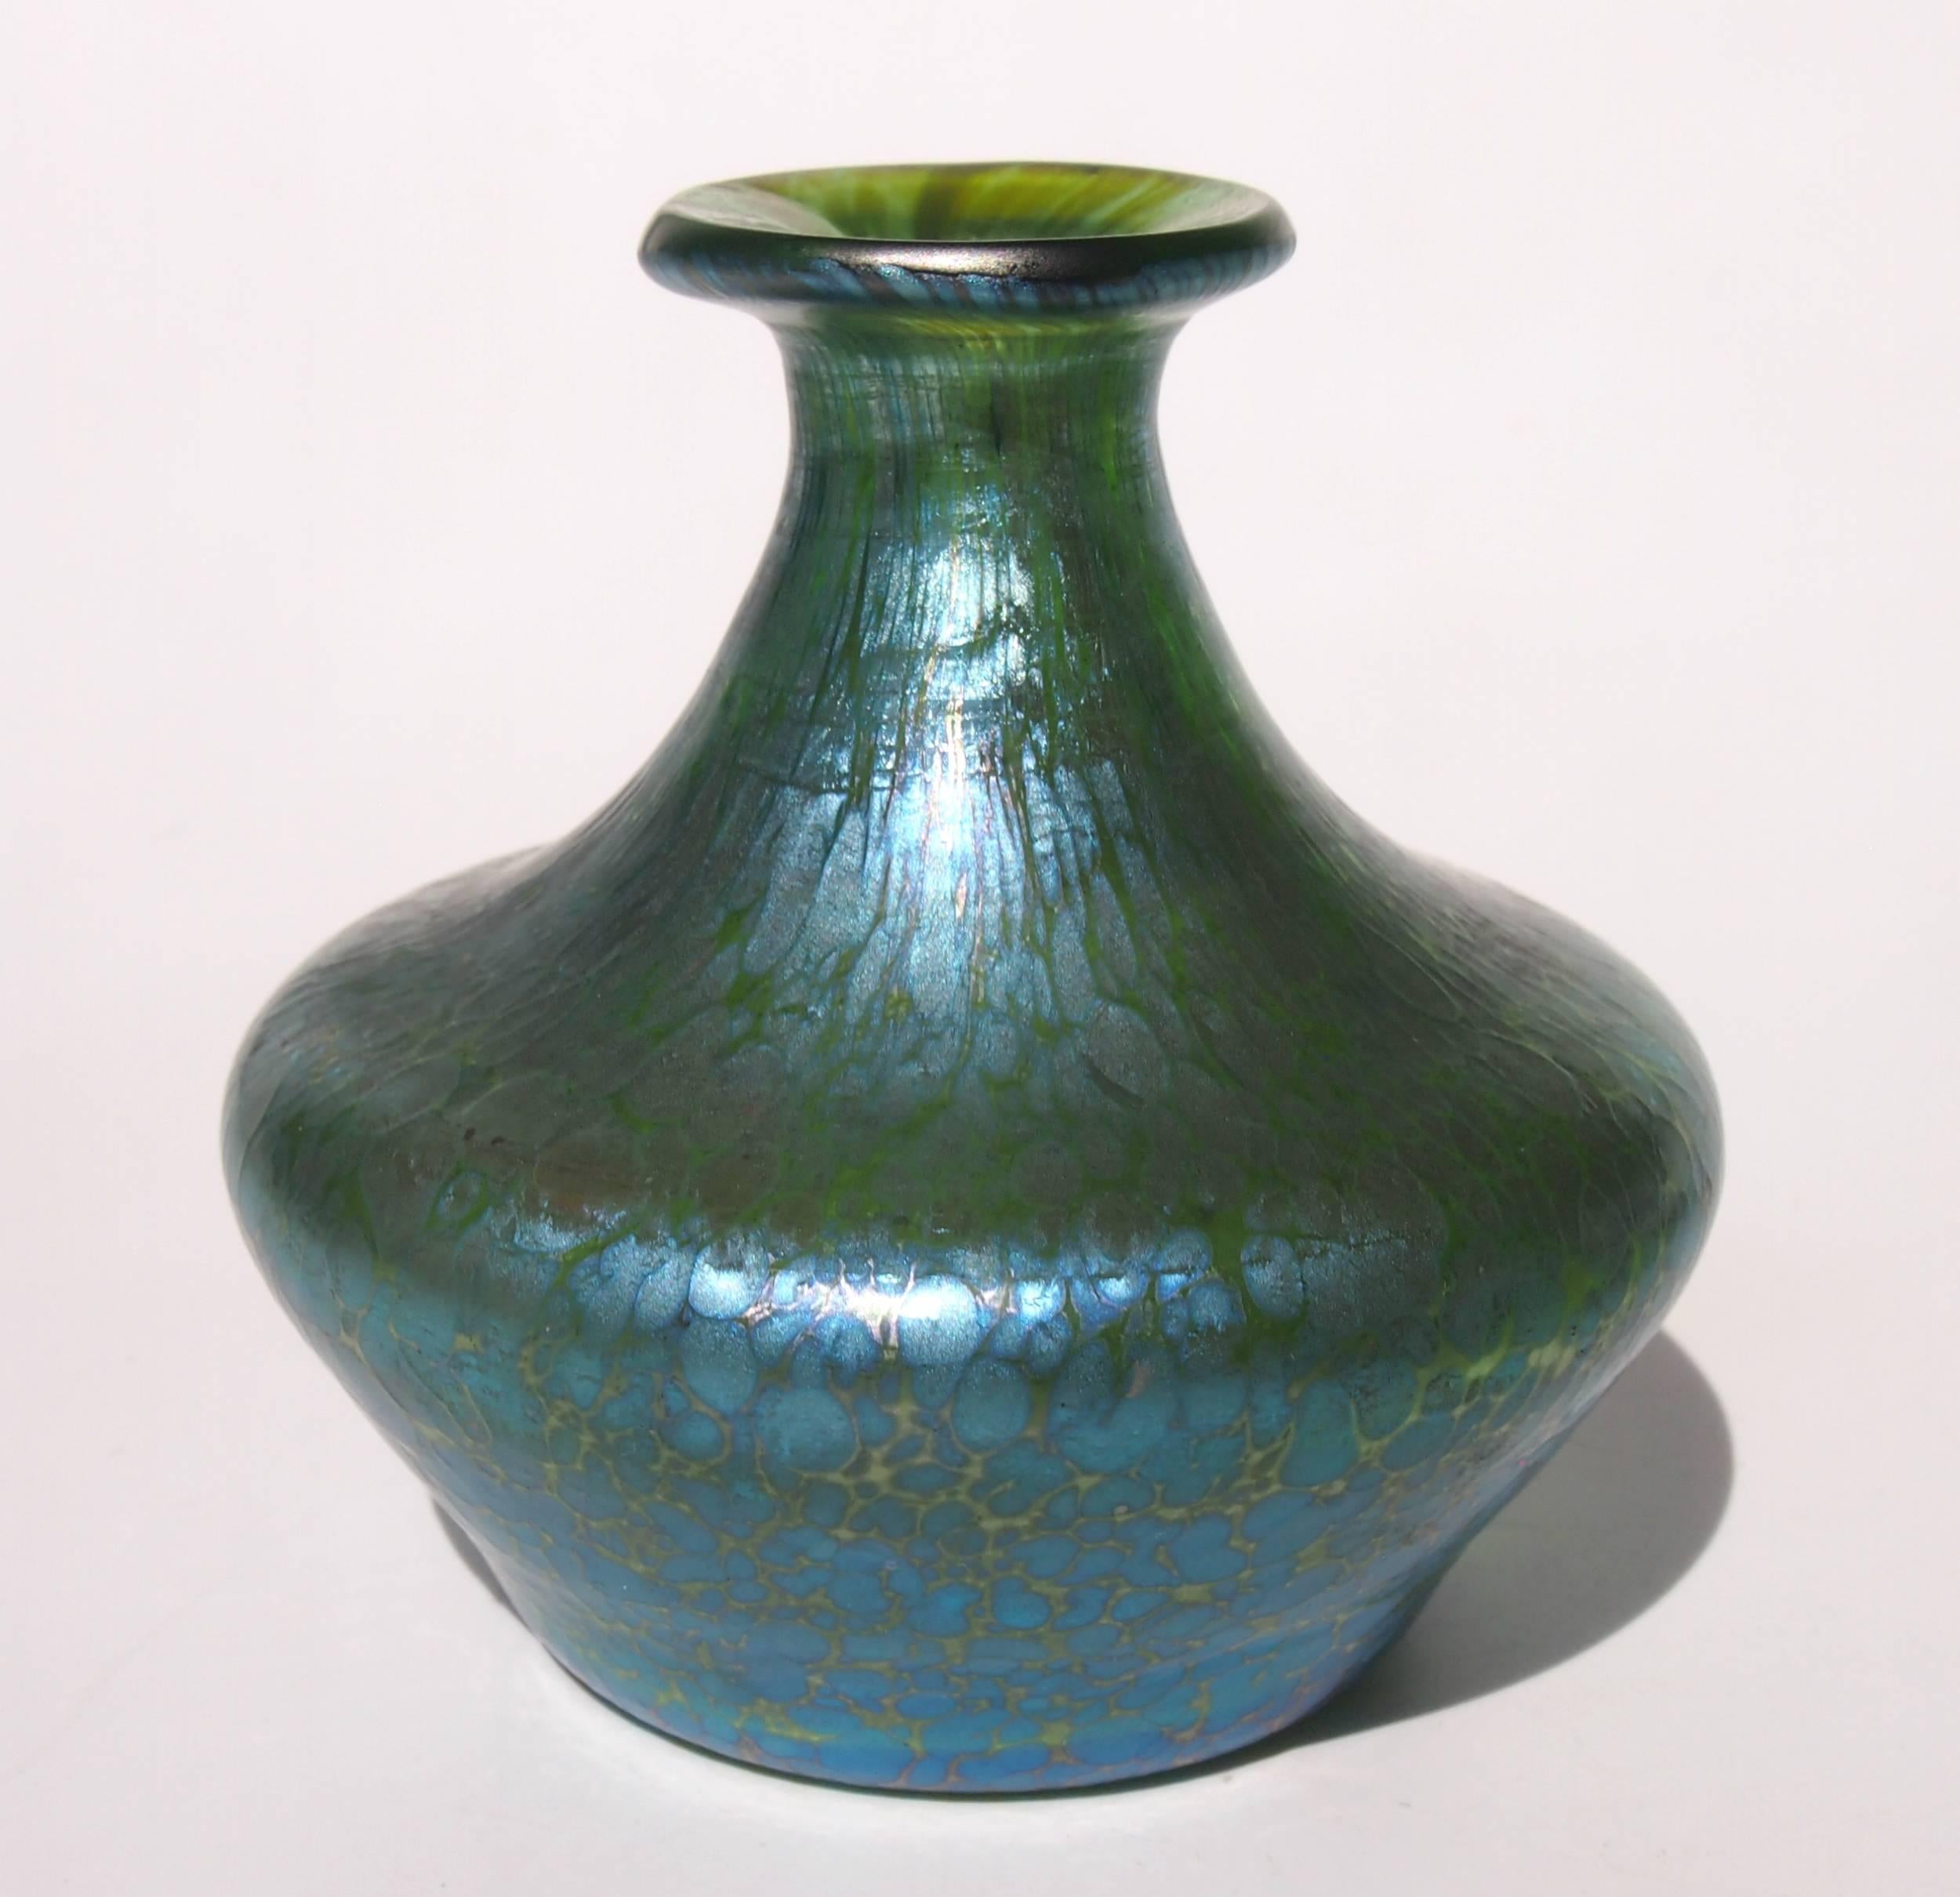 Super Art Nouveau Loetz Crete (green glass) Papillon (butterfly wing) small vase - this vase is an unusual slight variant of papillon - it is slightly less iridised than usual but also much more blue in the surface finish - It has a finished top and